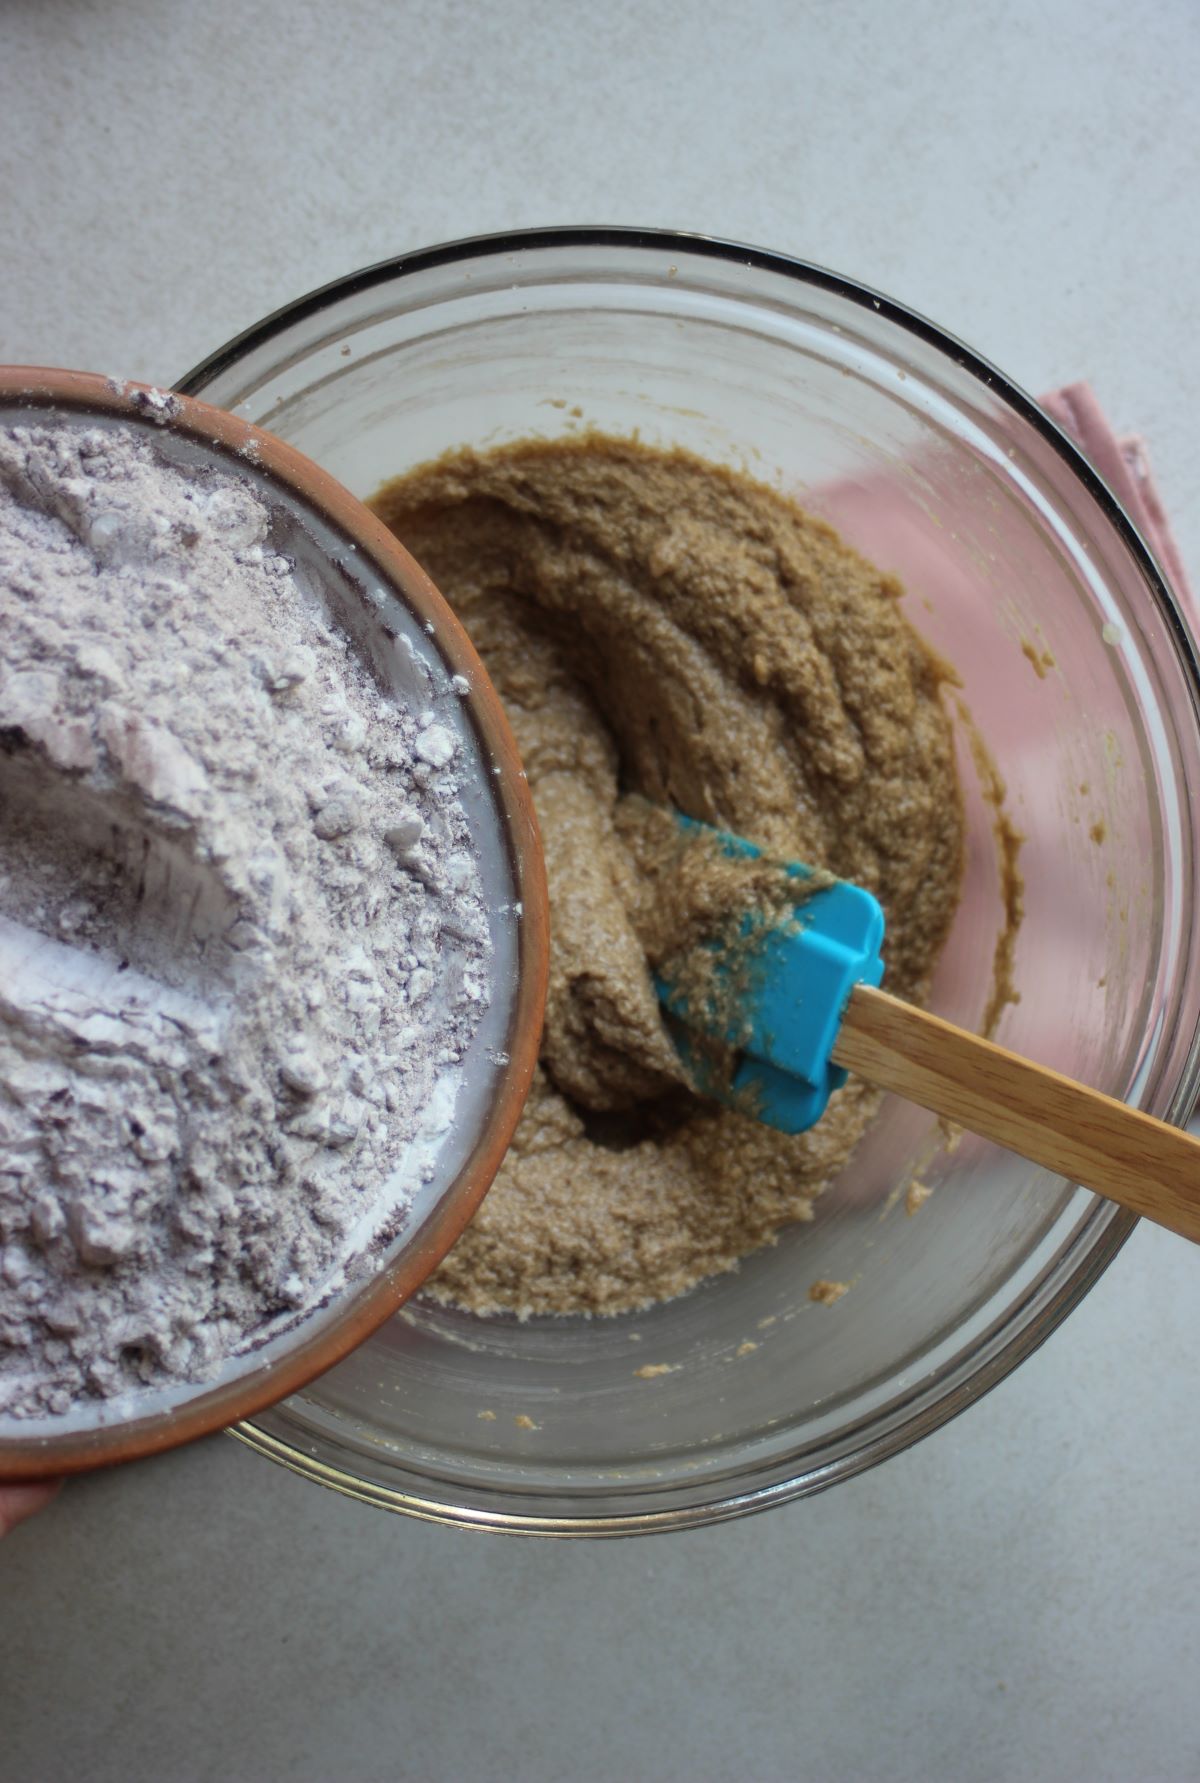 Plate with flour is about to be poured into a glass bowl with a mixture and a rubber spatula.